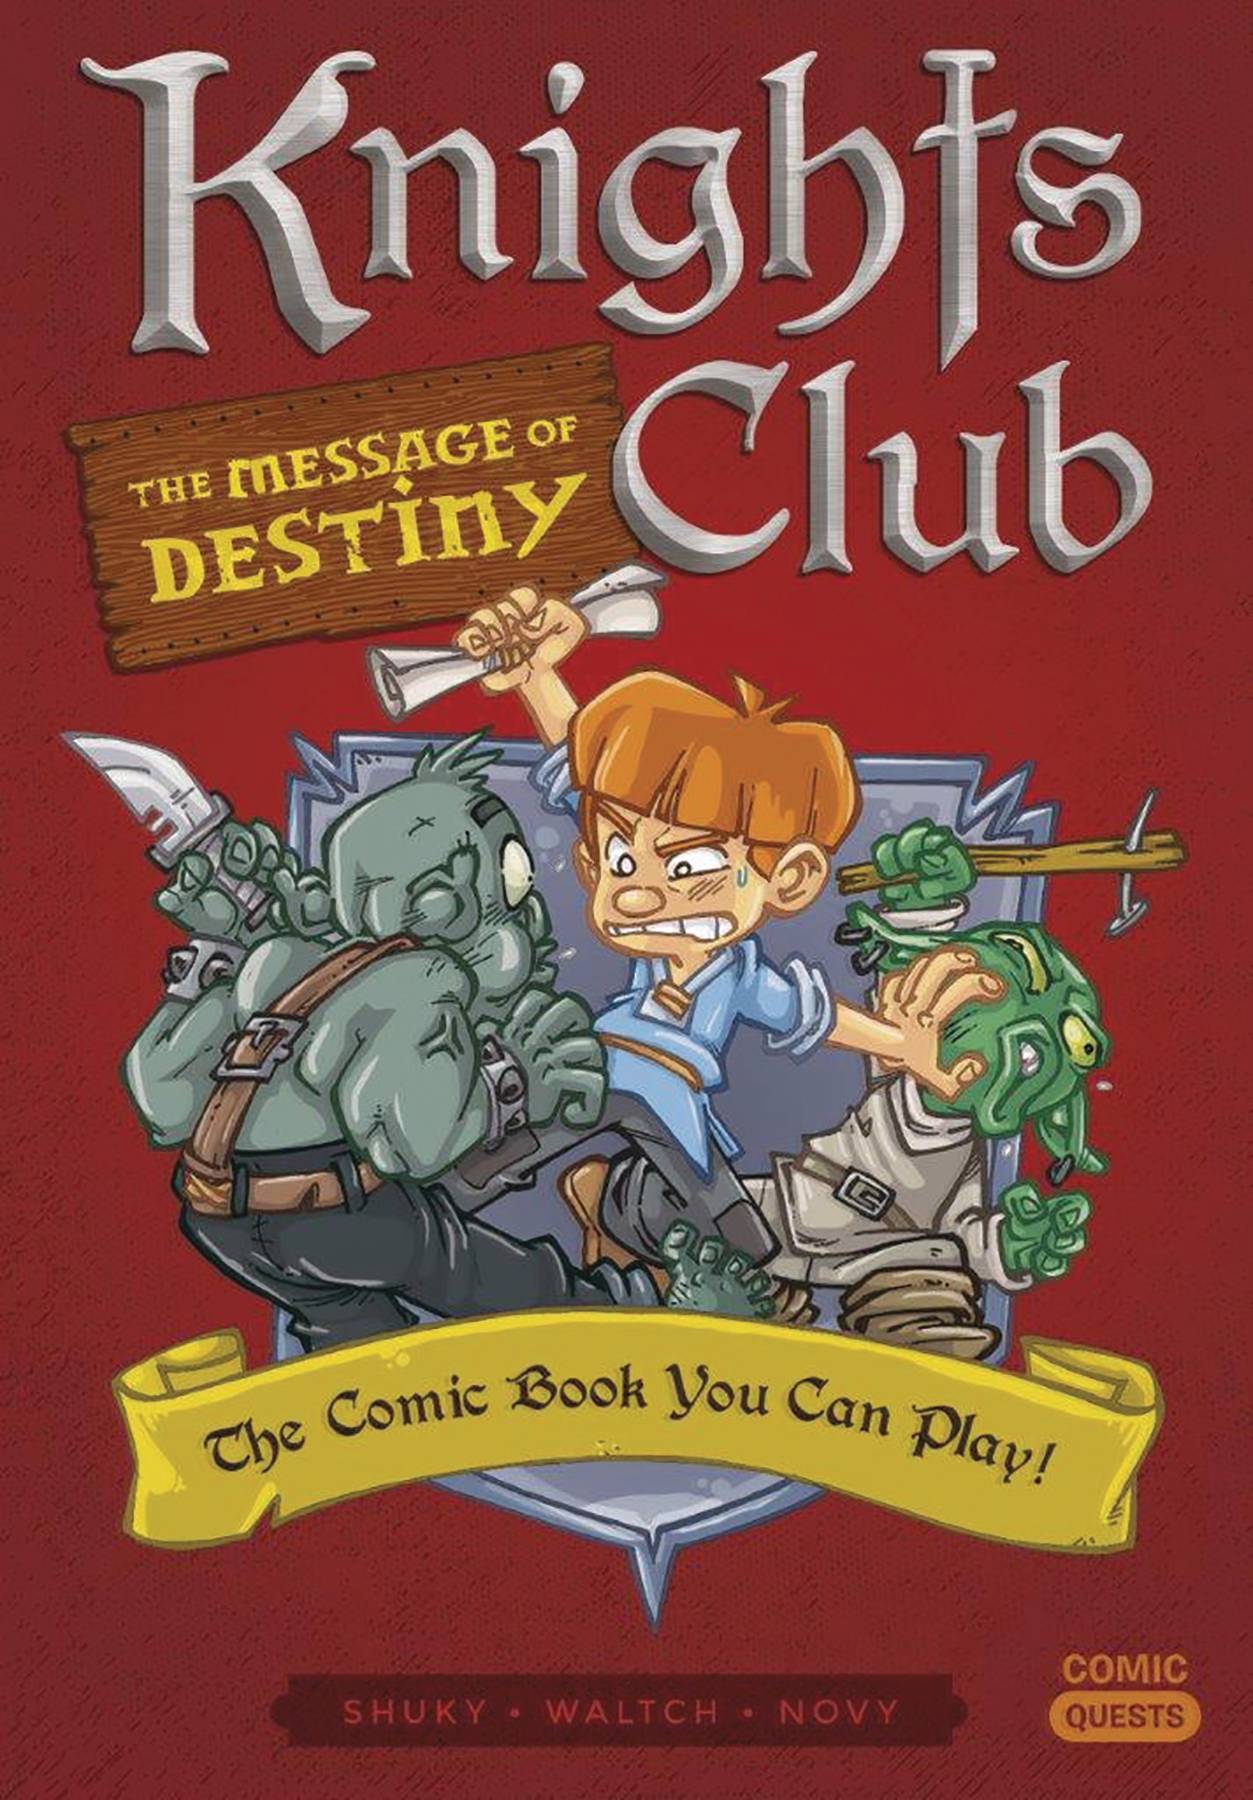 Comic Quests Volume 4 Knights Club Message of Destiny